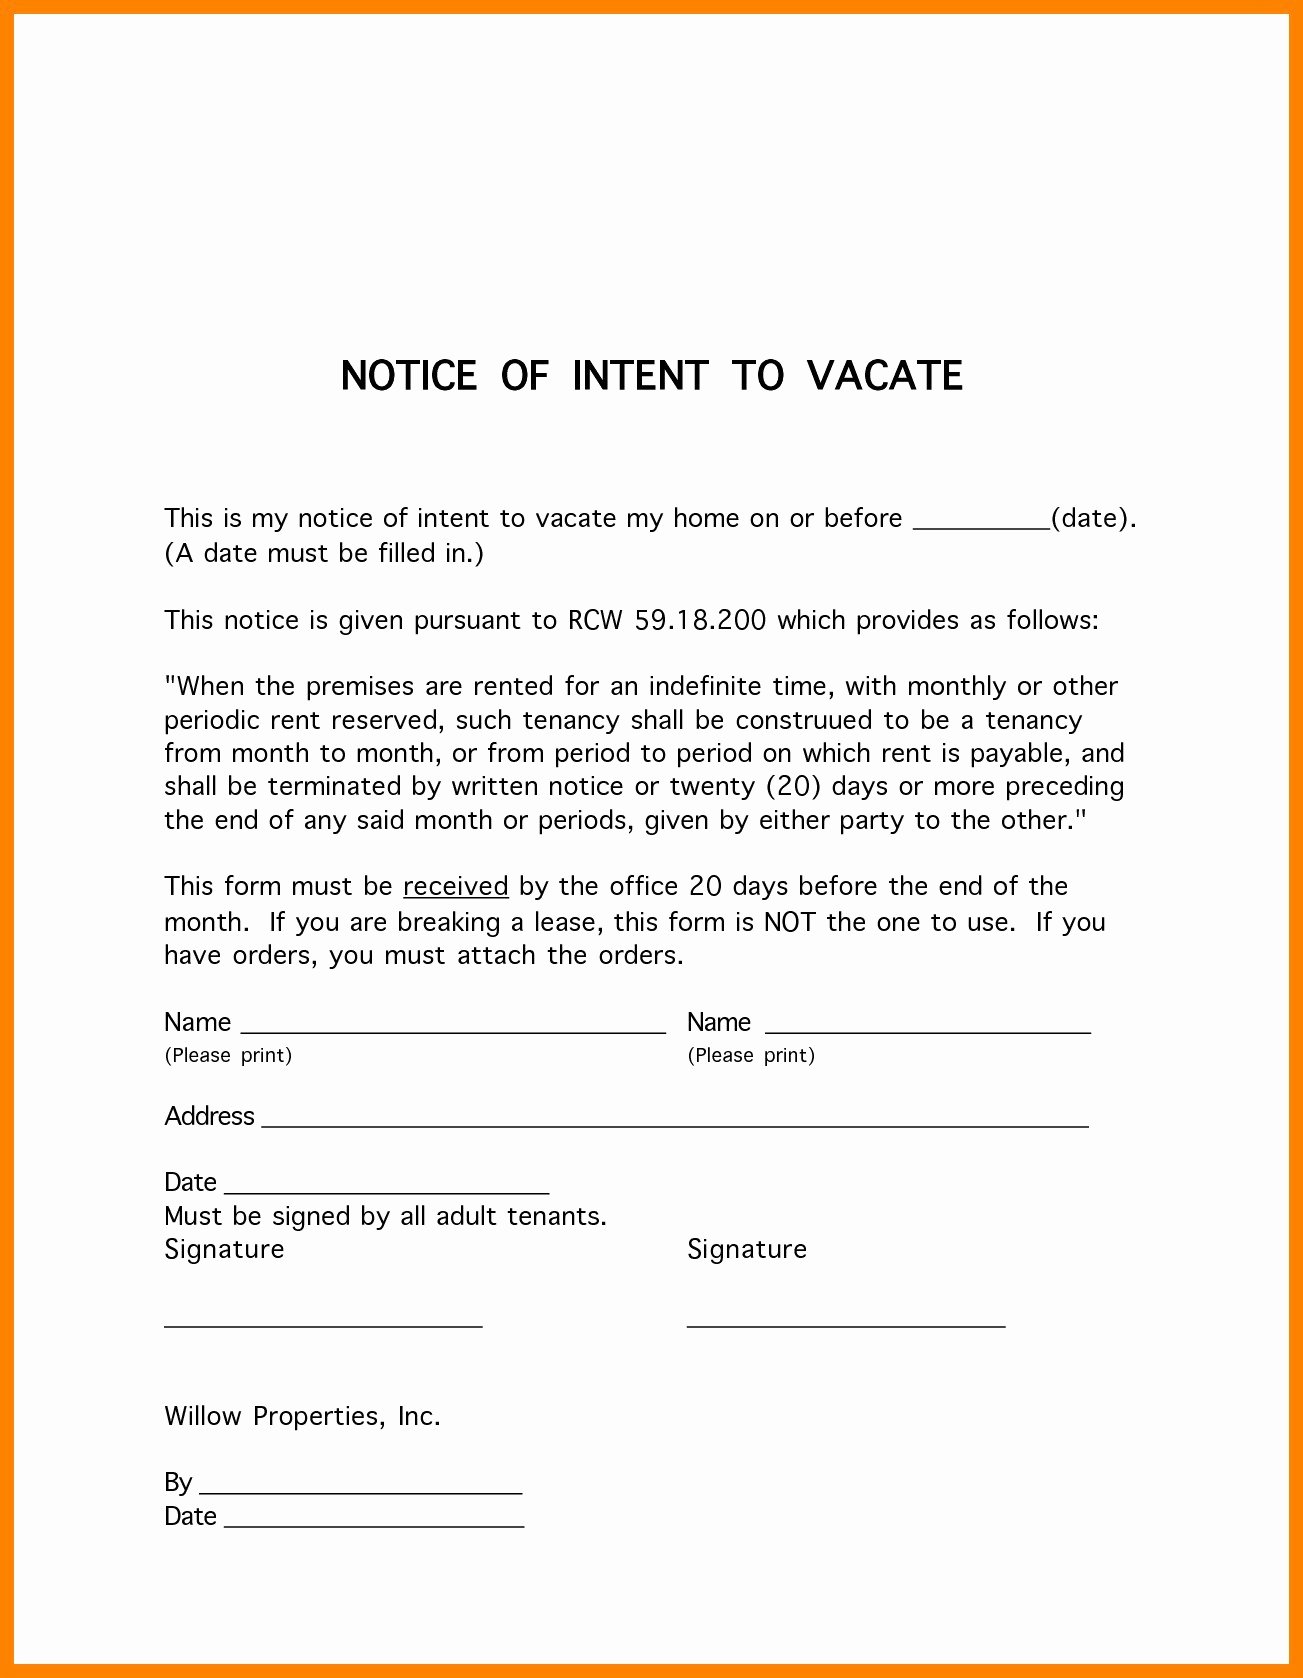 Sample Letter to Vacate Apartment Best Of Notice Intent to Vacate Letter Template Collection